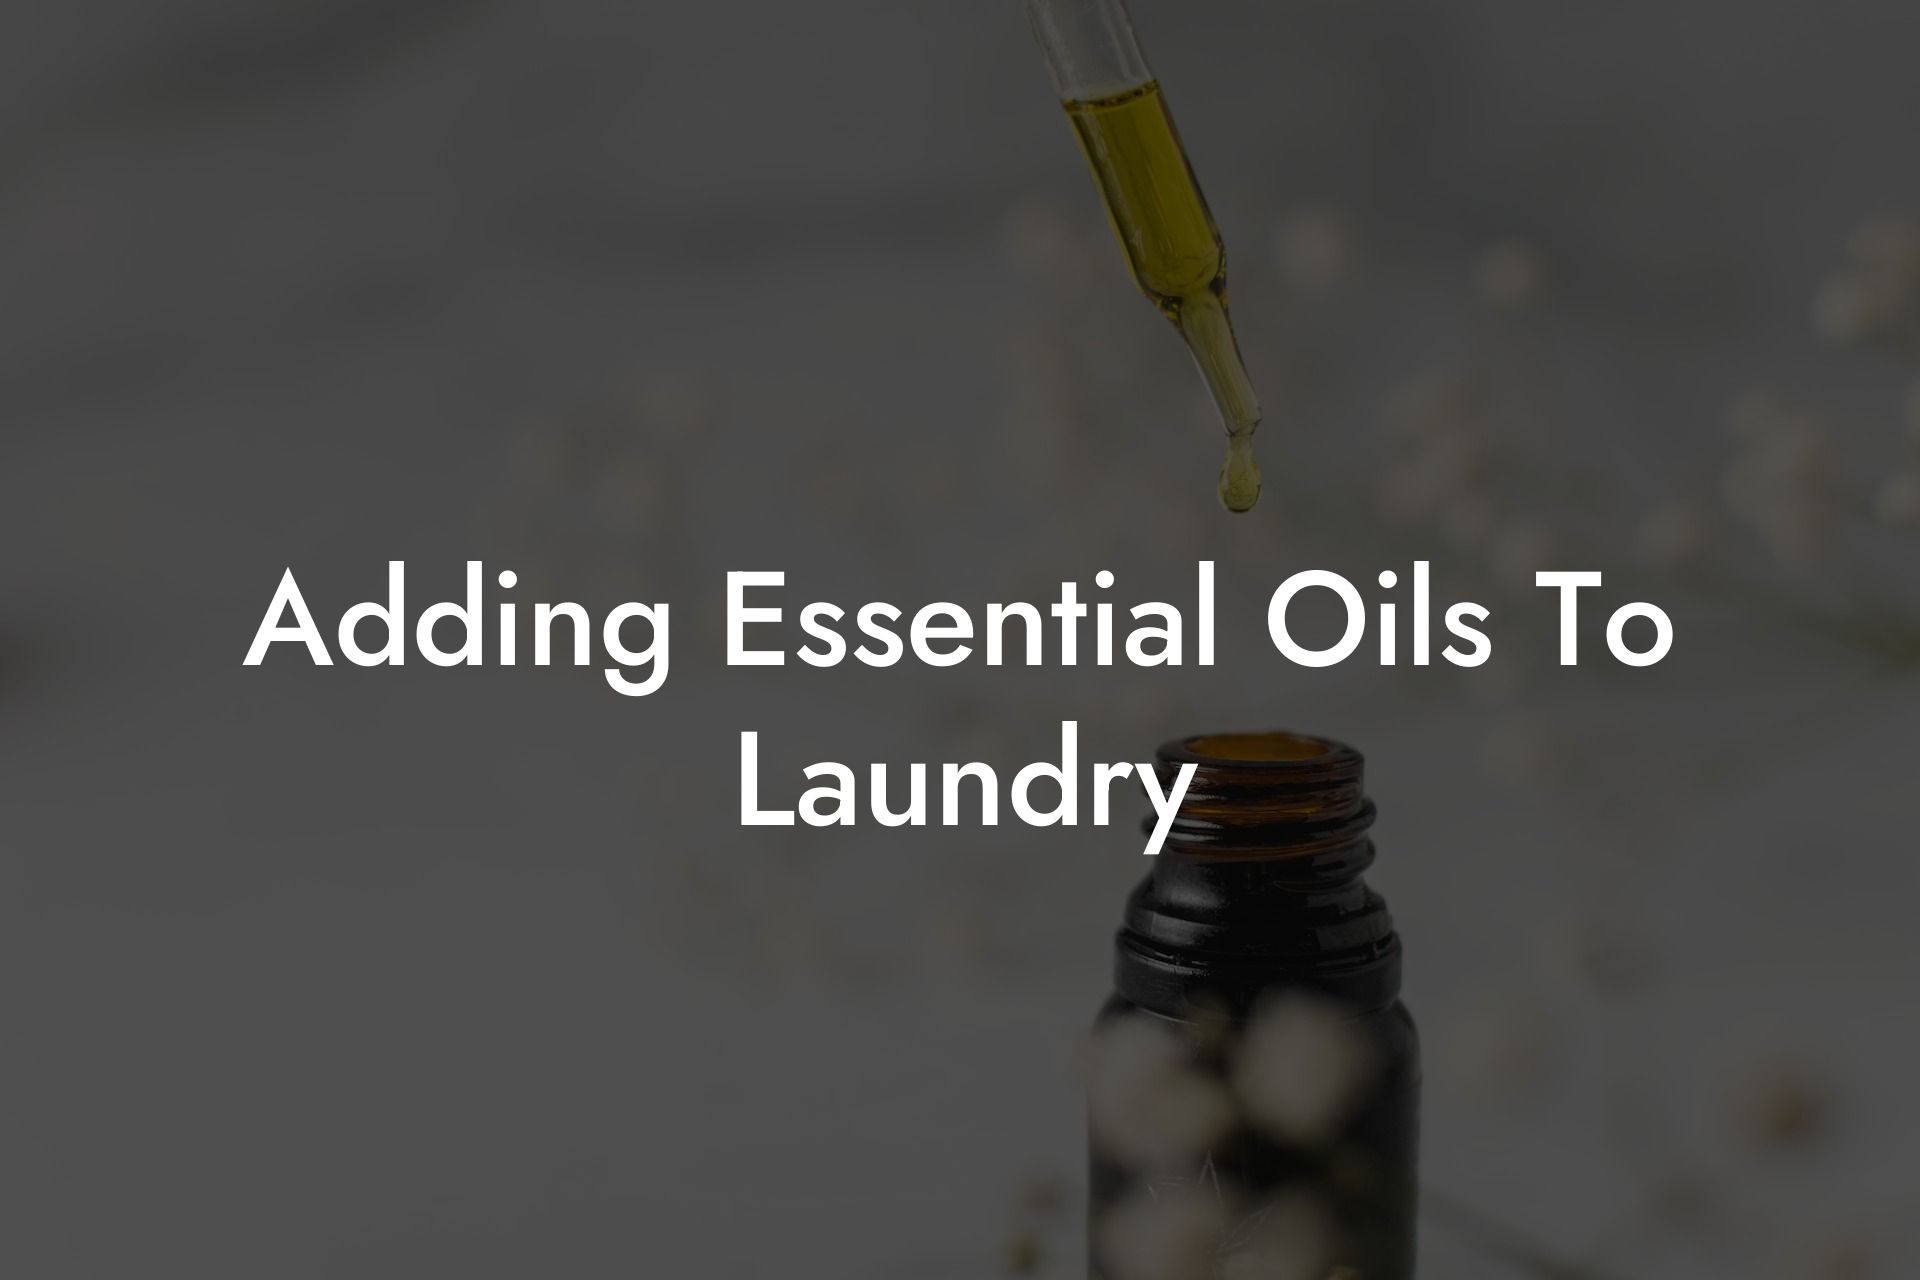 Adding Essential Oils To Laundry